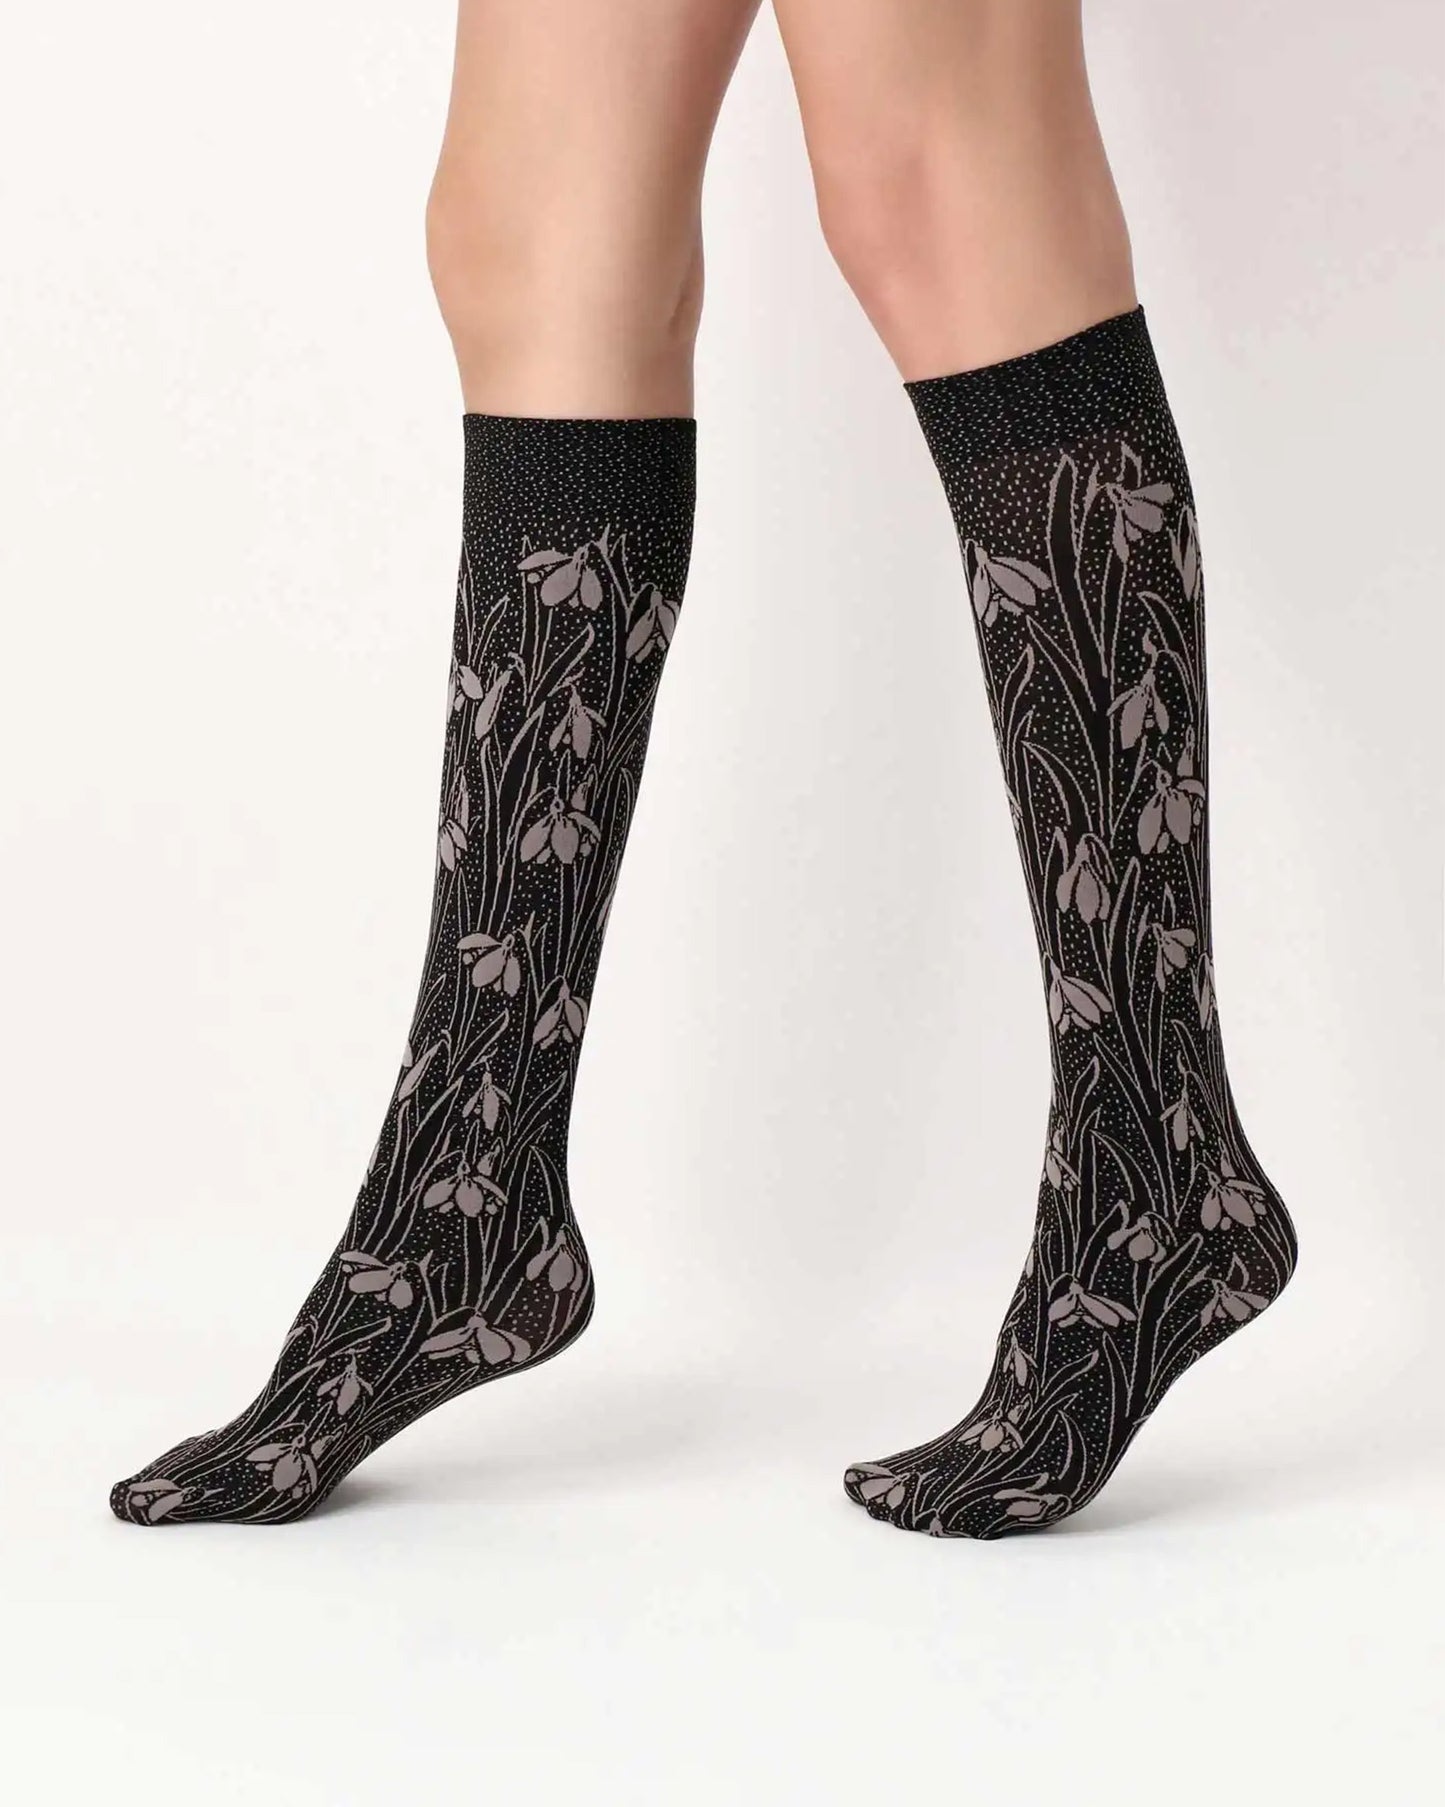 Oroblù Flowers Knee-highs - Black opaque fashion knee-high socks with a beige snowdrop style floral pattern with speckled background and elasticated comfort cuff.